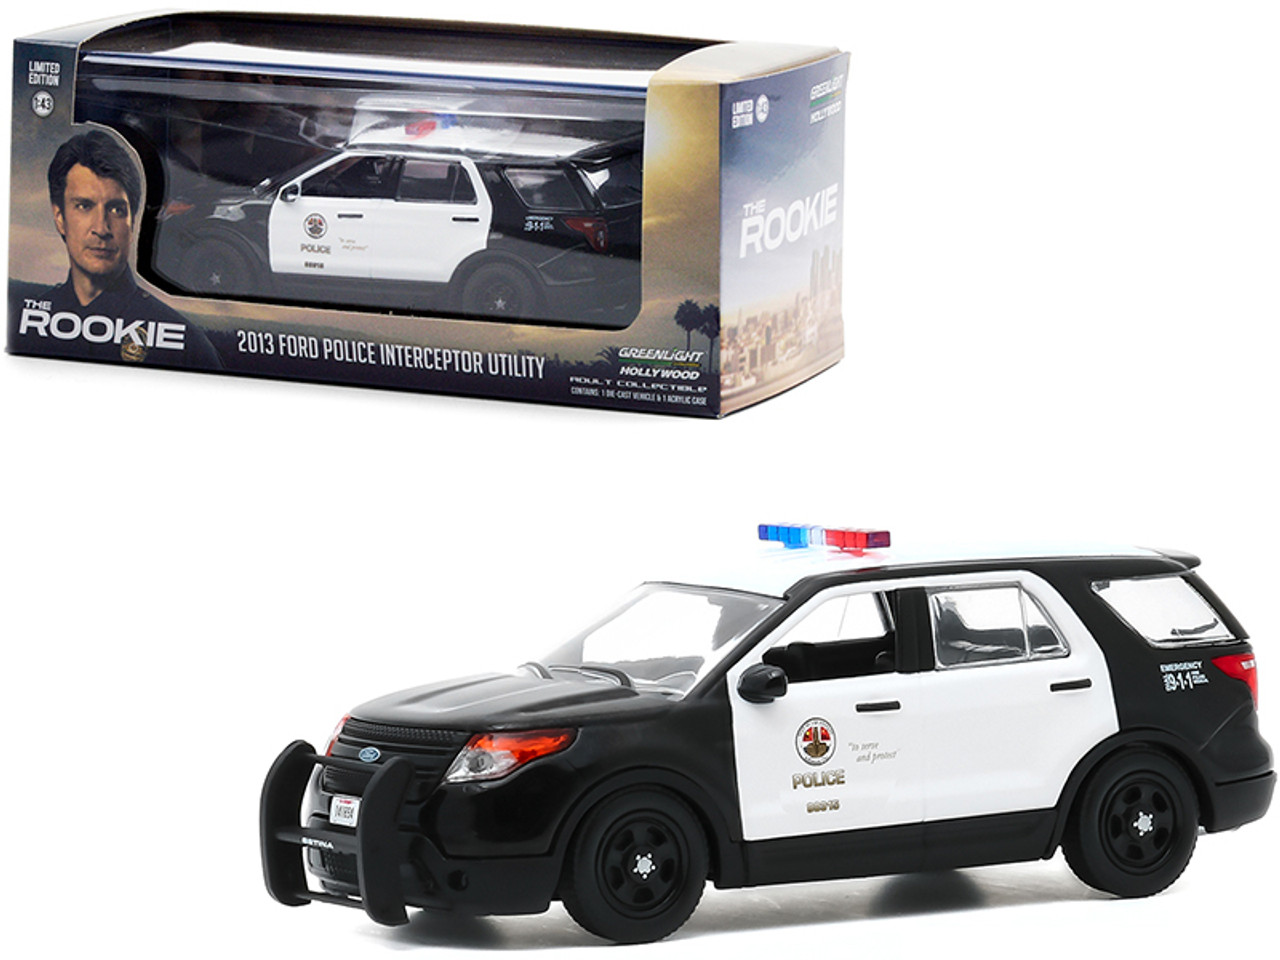 2013 Ford Police Interceptor Utility White and Black "LAPD" (Los Angeles Police Department) "The Rookie" (2018) TV Series 1/43 Diecast Model Car by Greenlight